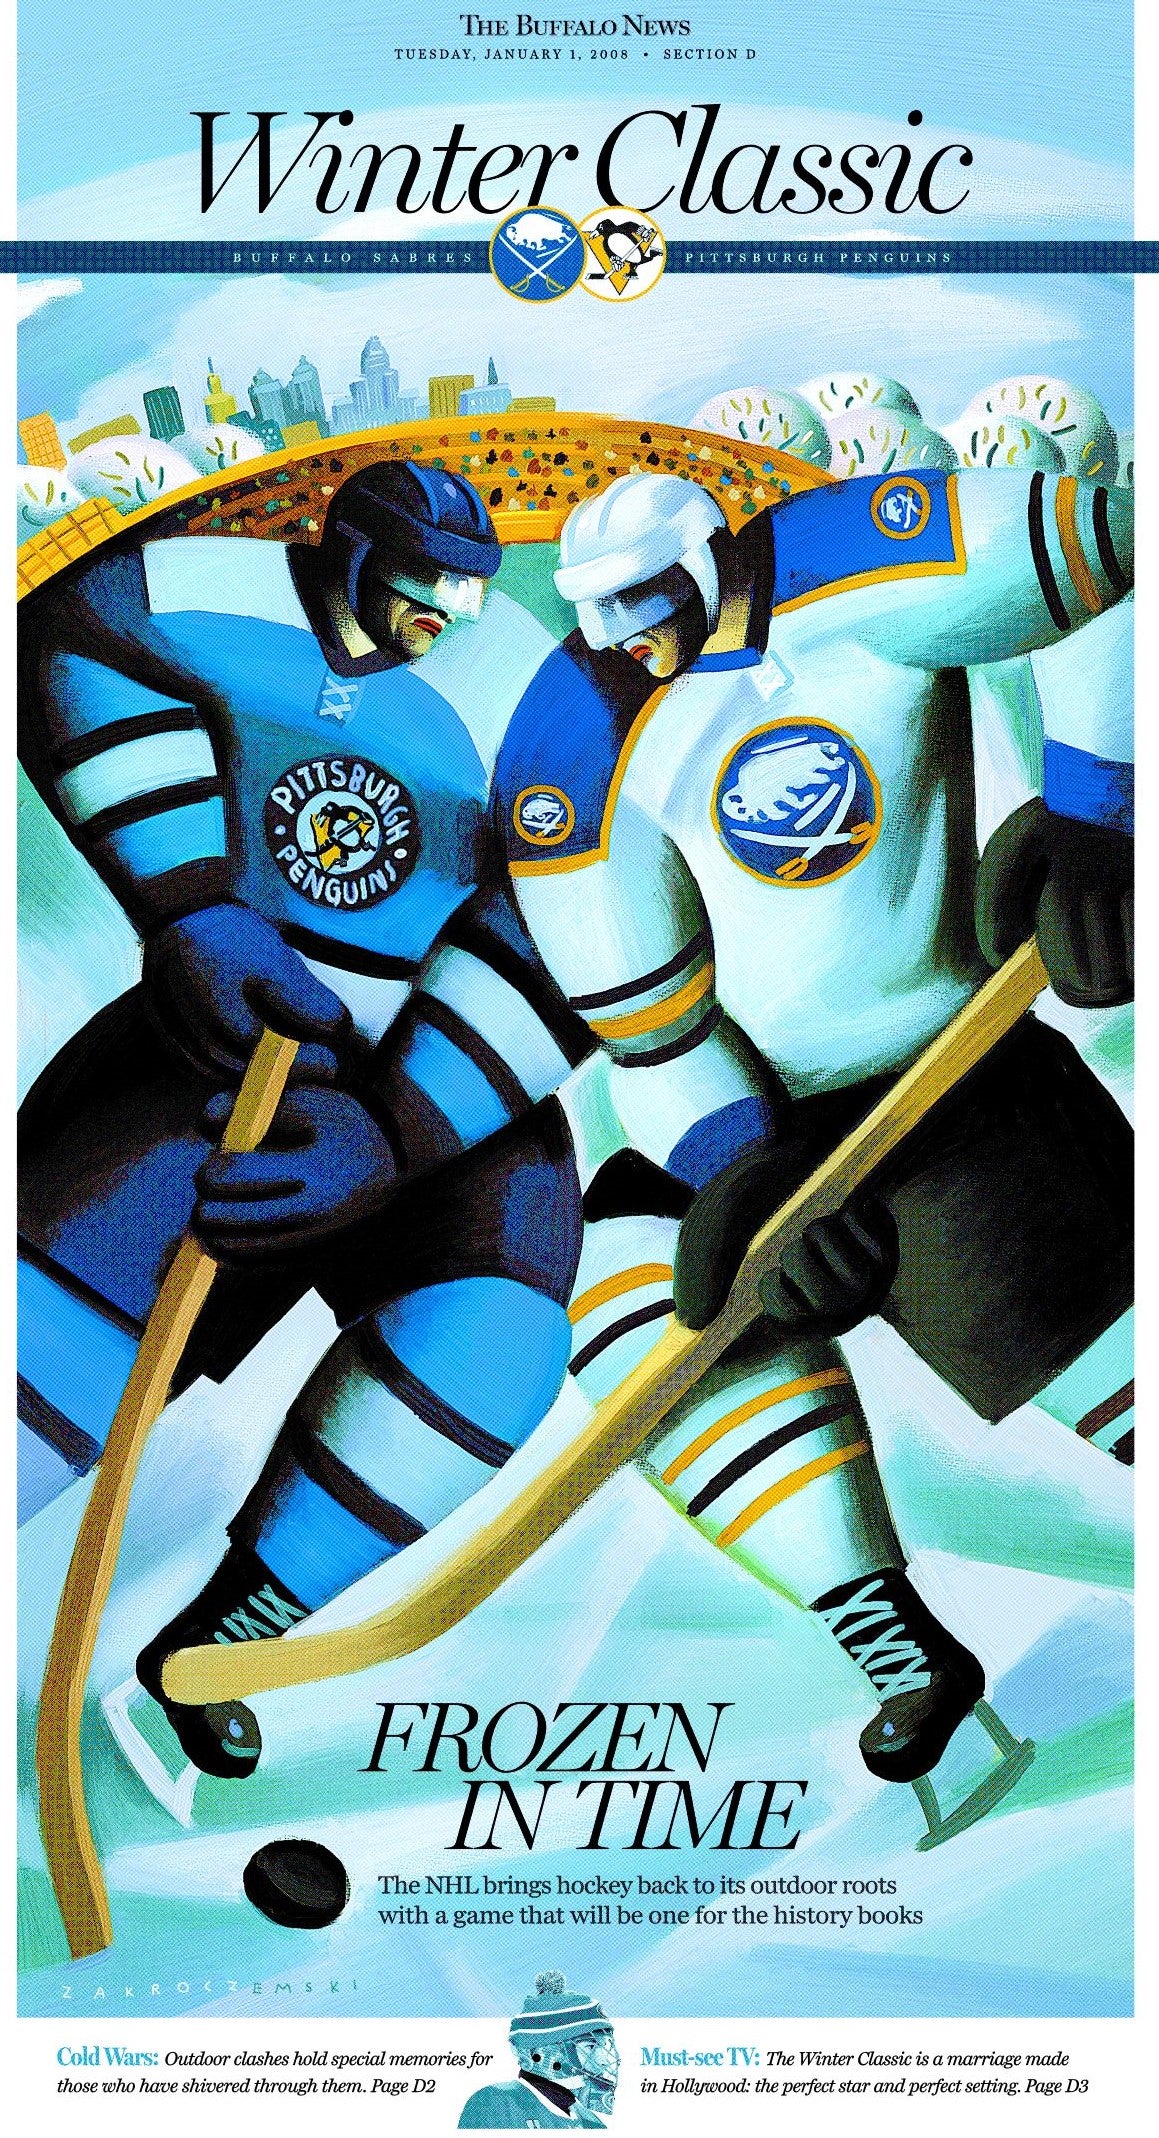 Winter Classic - January 1, 2008 Front-page poster